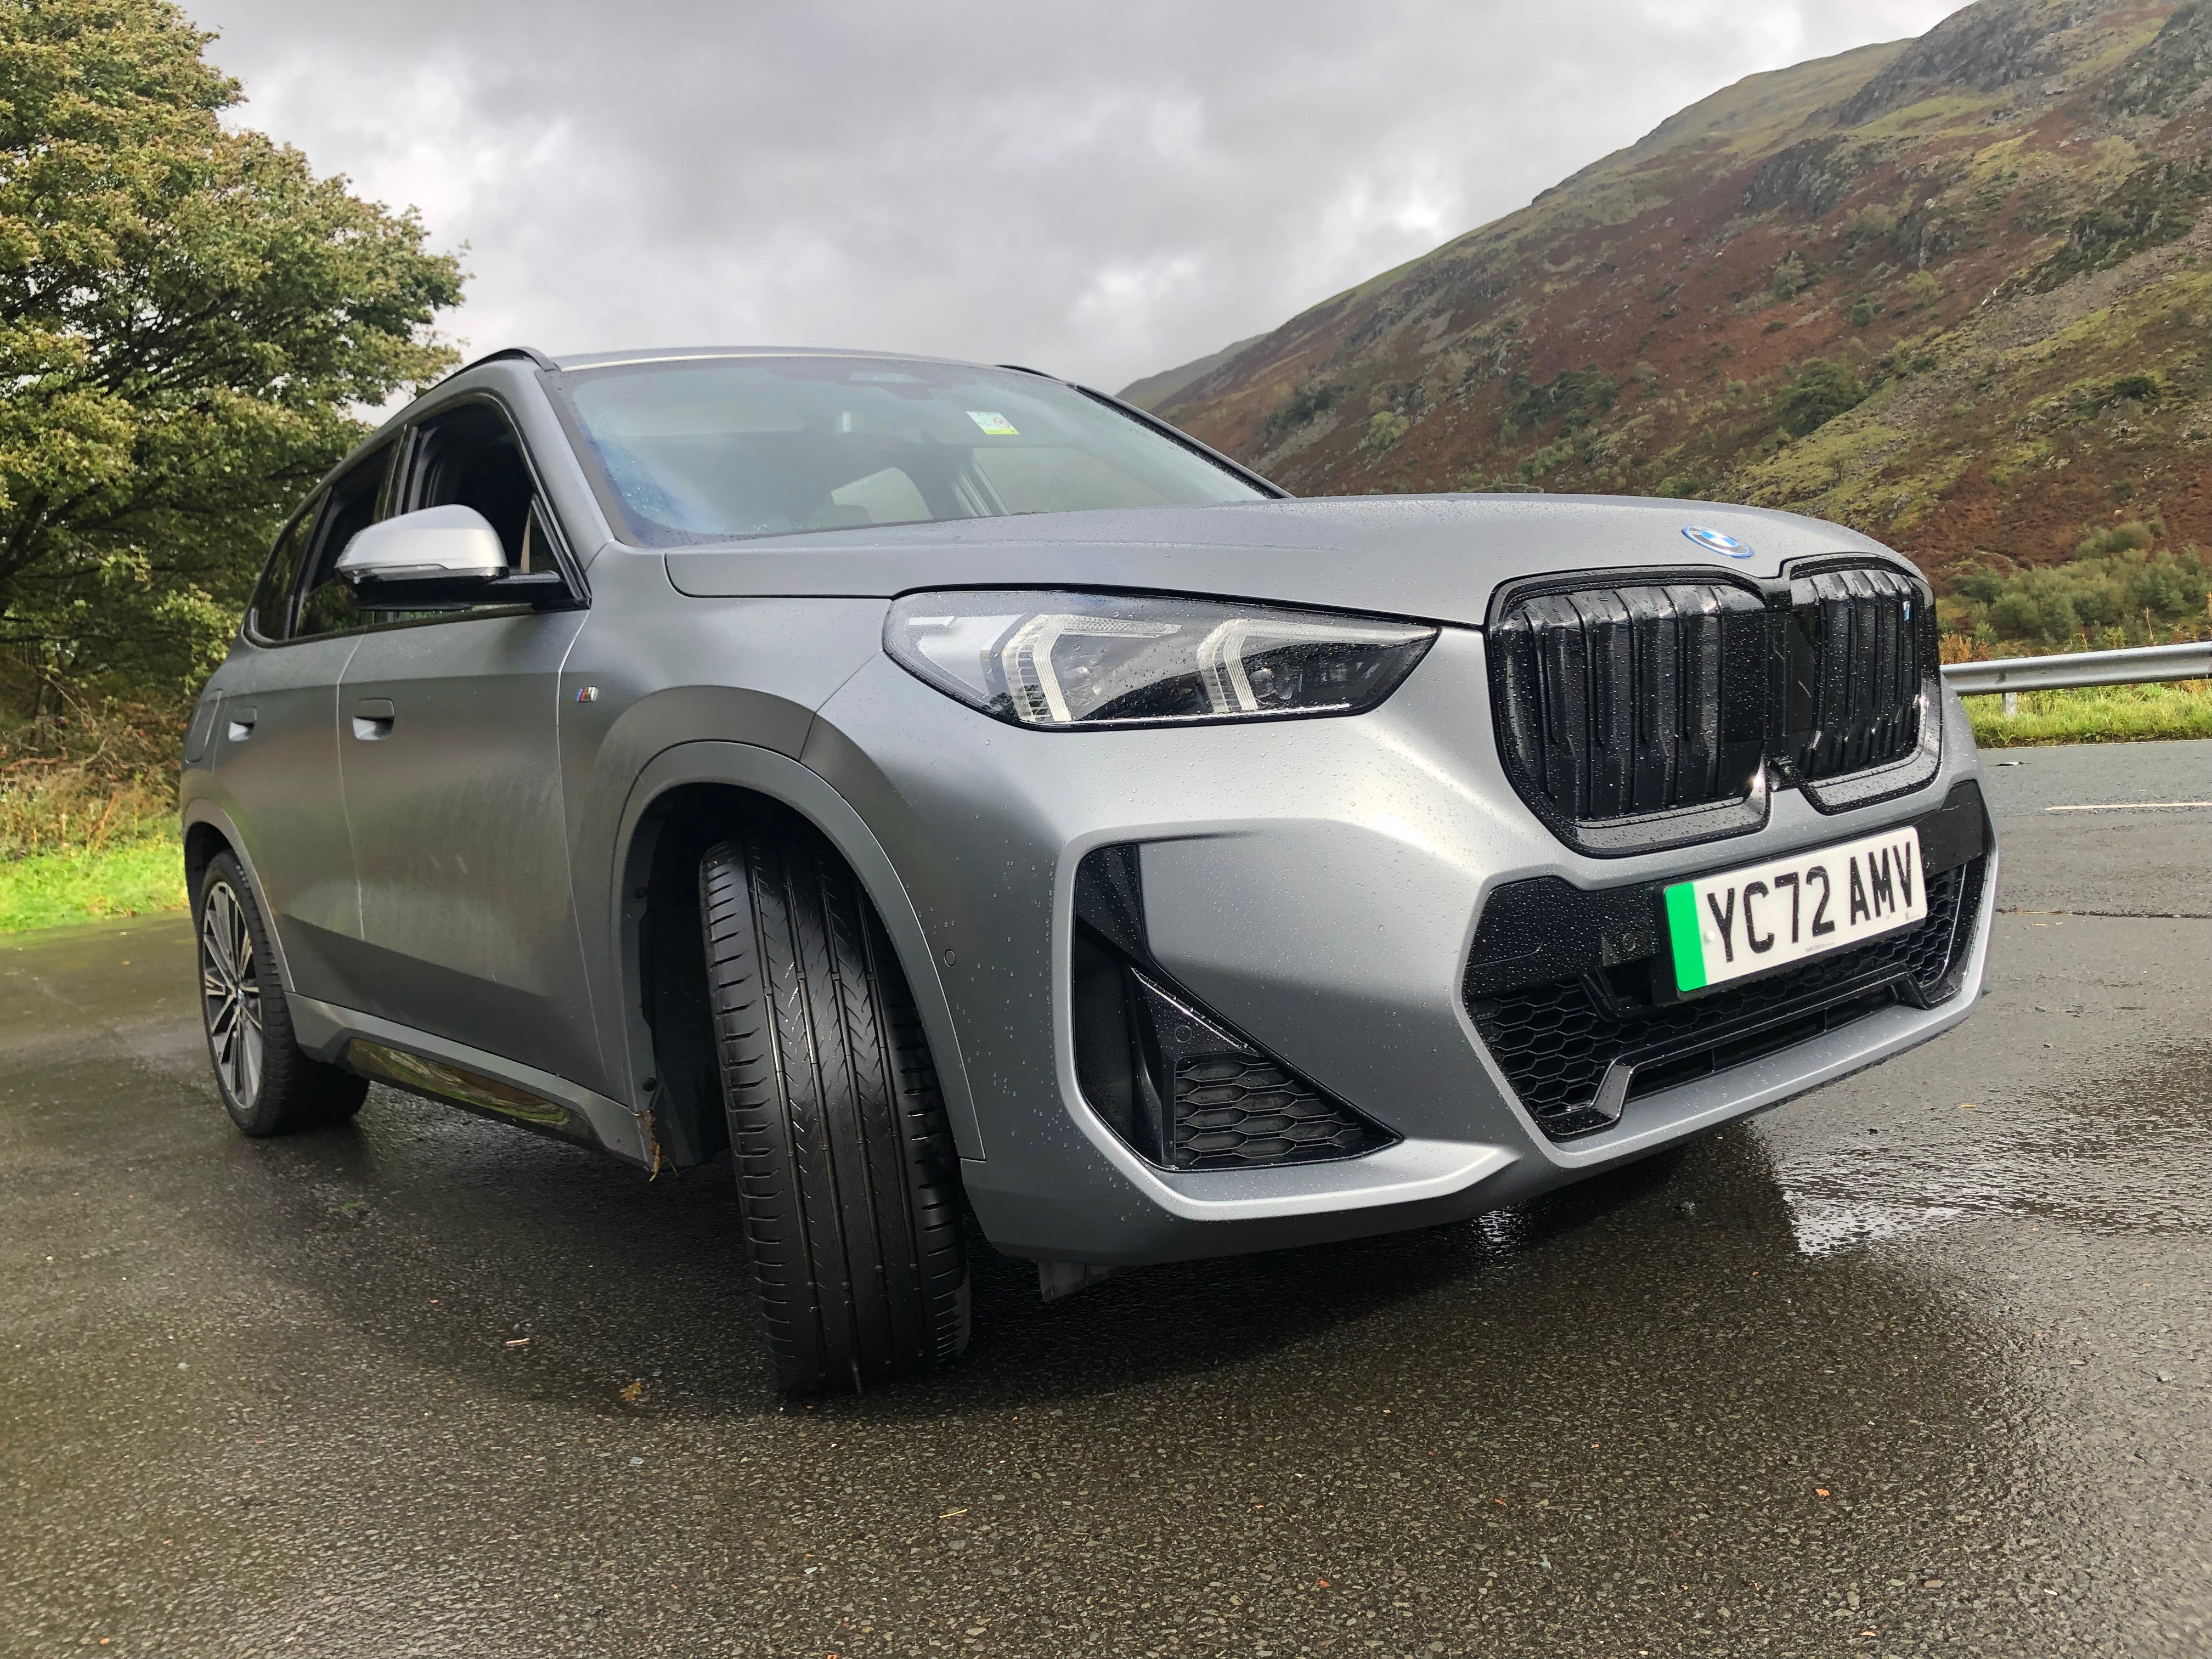 Car review: The very capable and virtually flawless BMW iX1